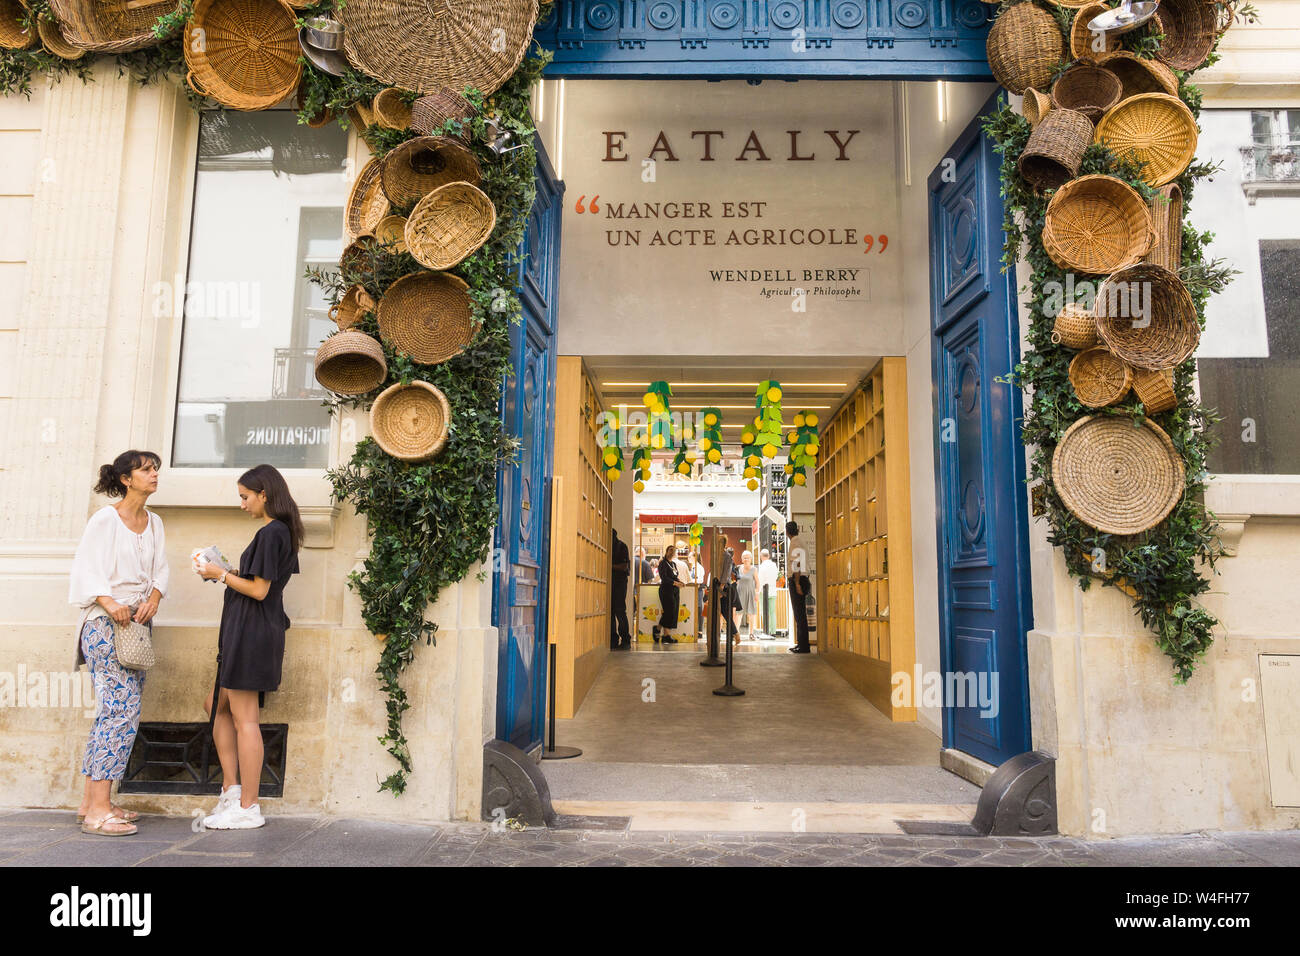 Eataly Paris - Store front of Eataly, the Italian marketplace and food hall, in Marais district of Paris, France, Europe. Stock Photo